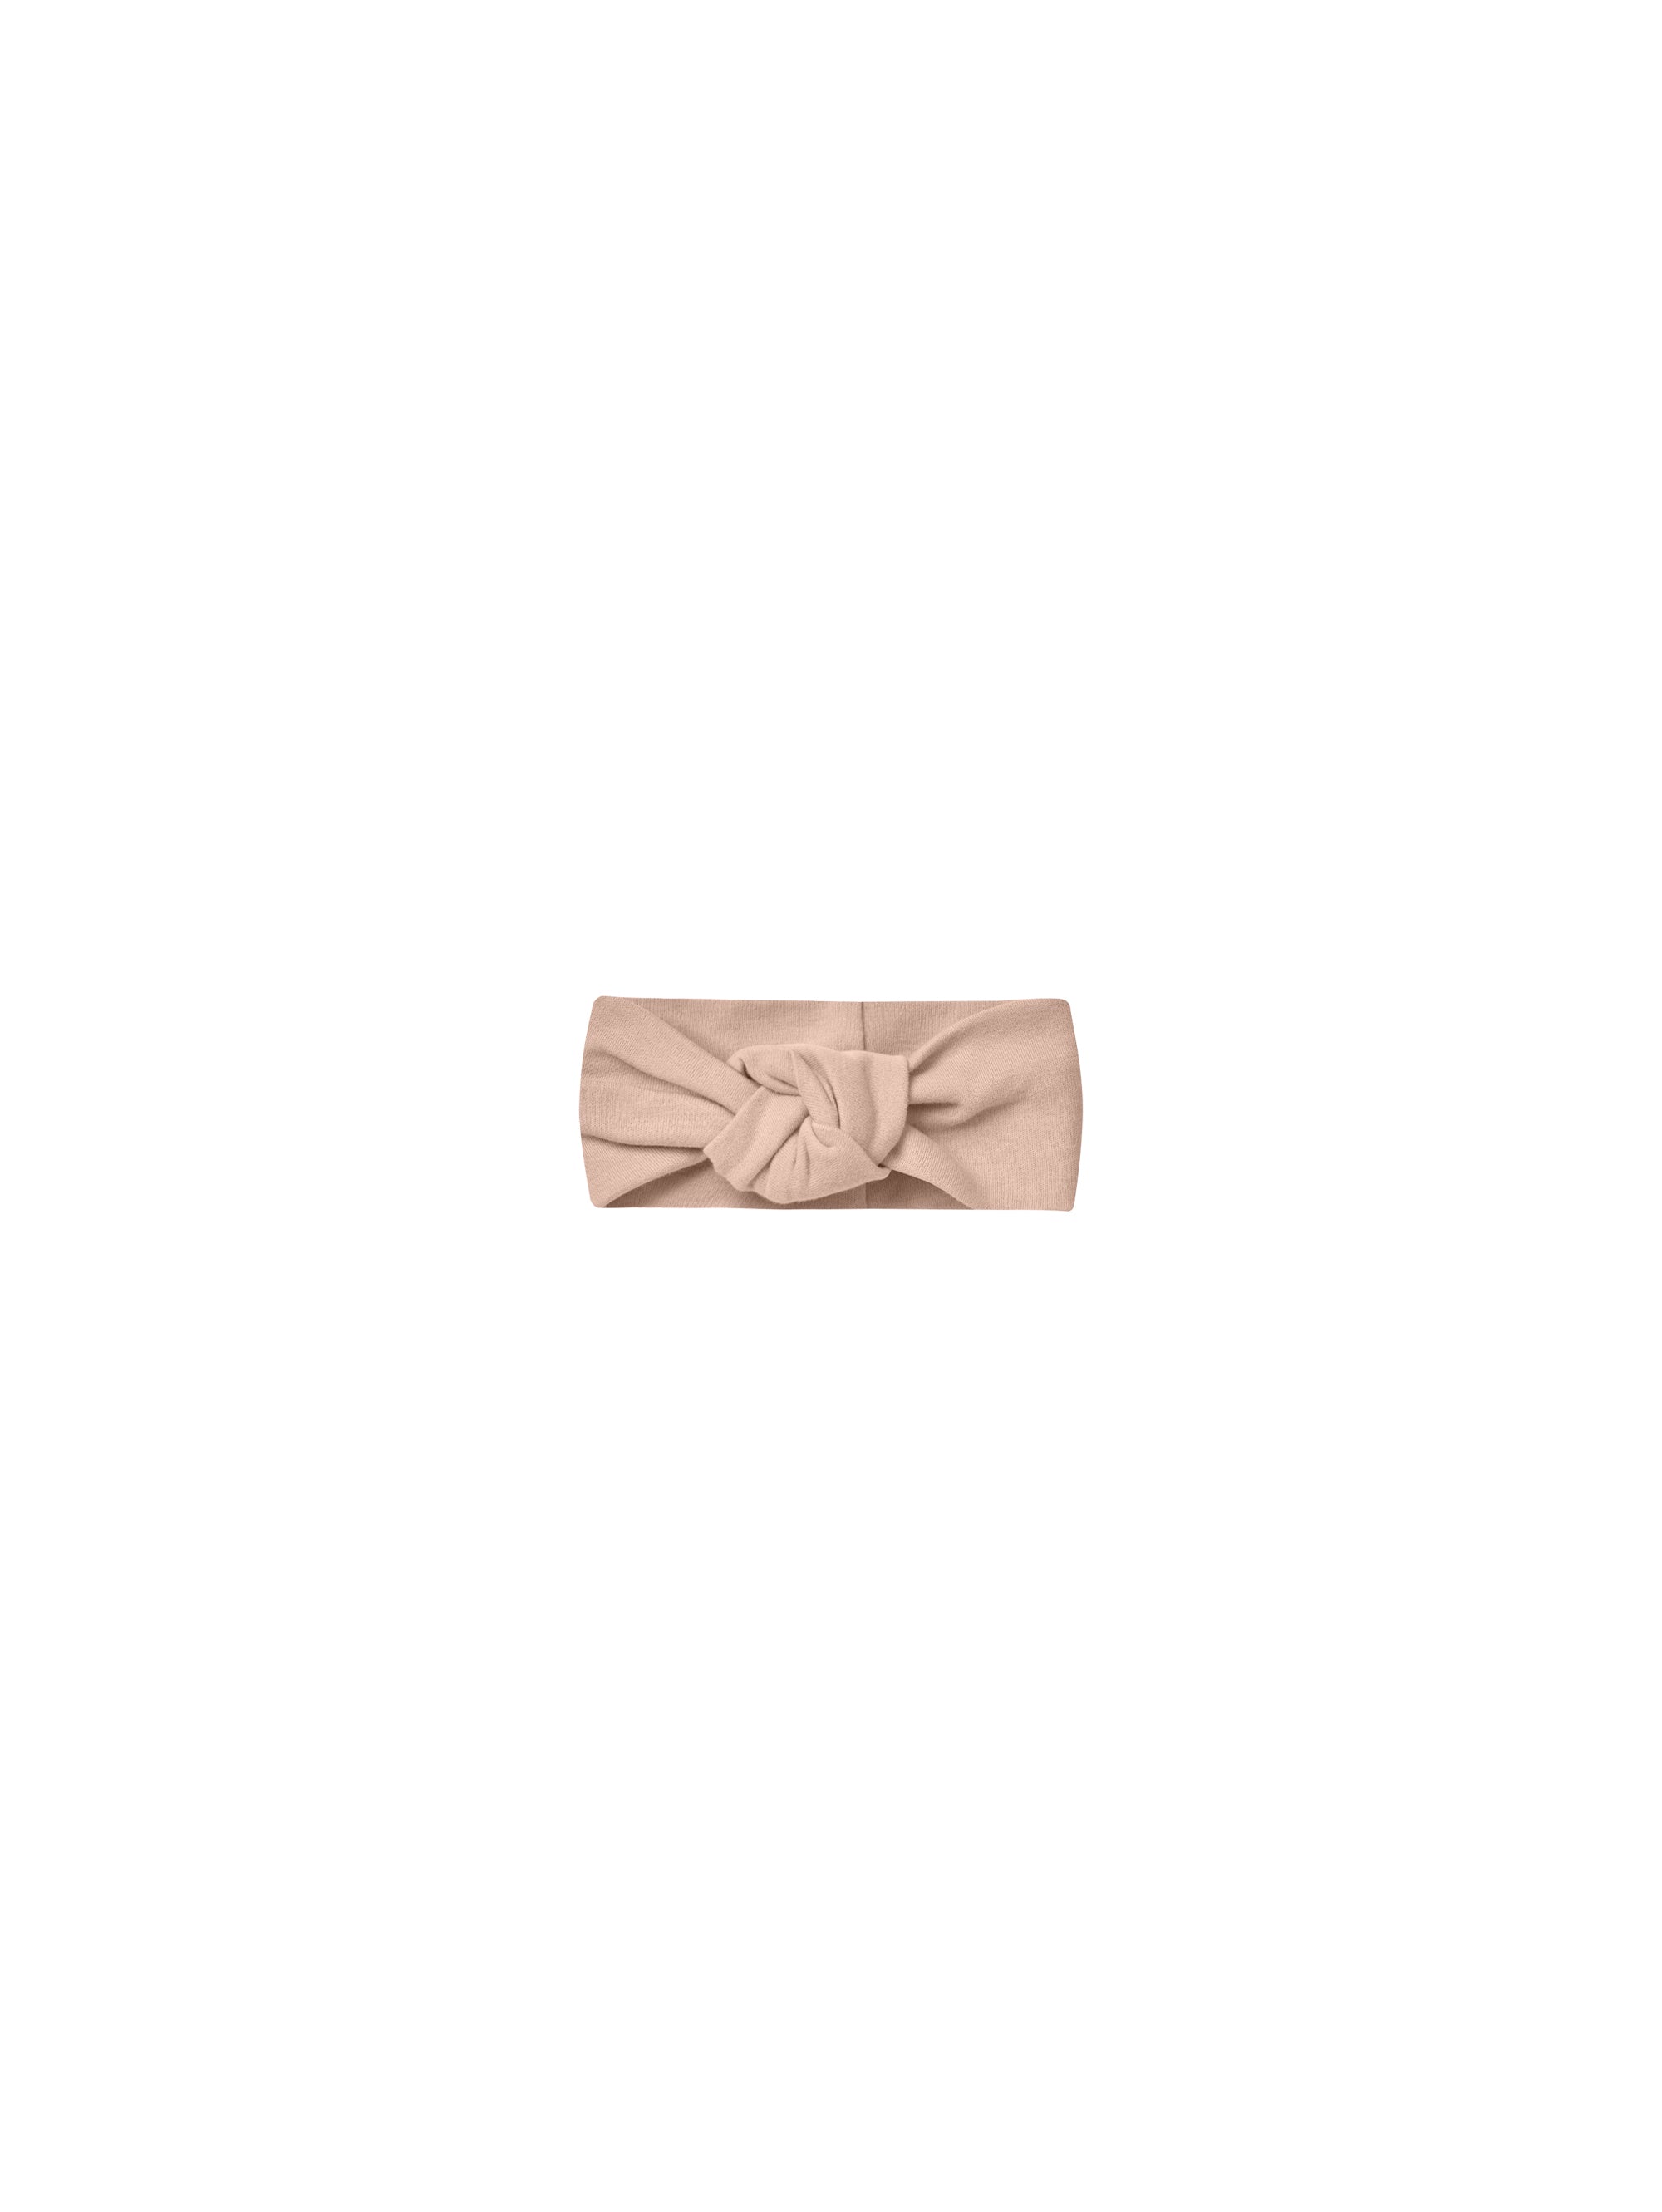 Quincy Mae | Knotted Headband || Blush